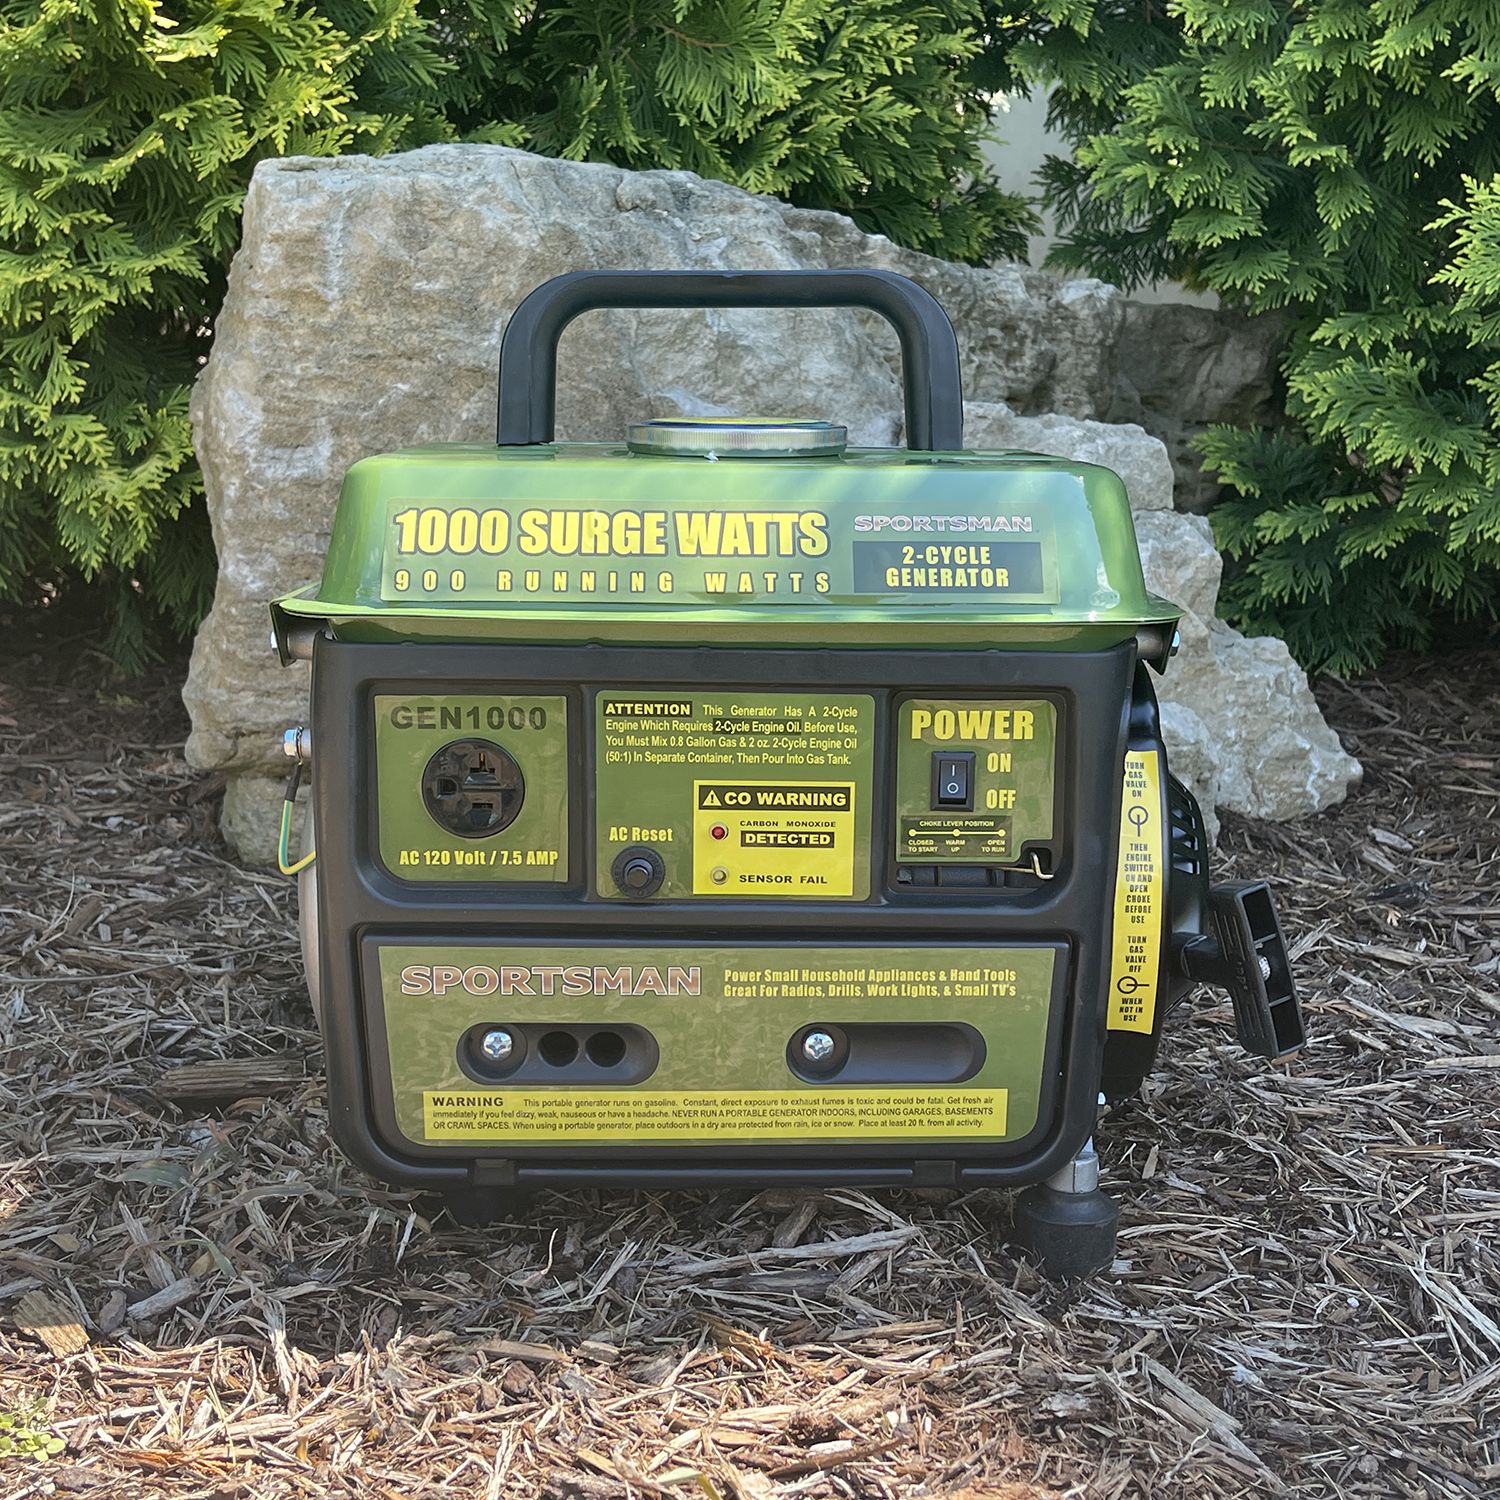 Outdoor power generator for camping